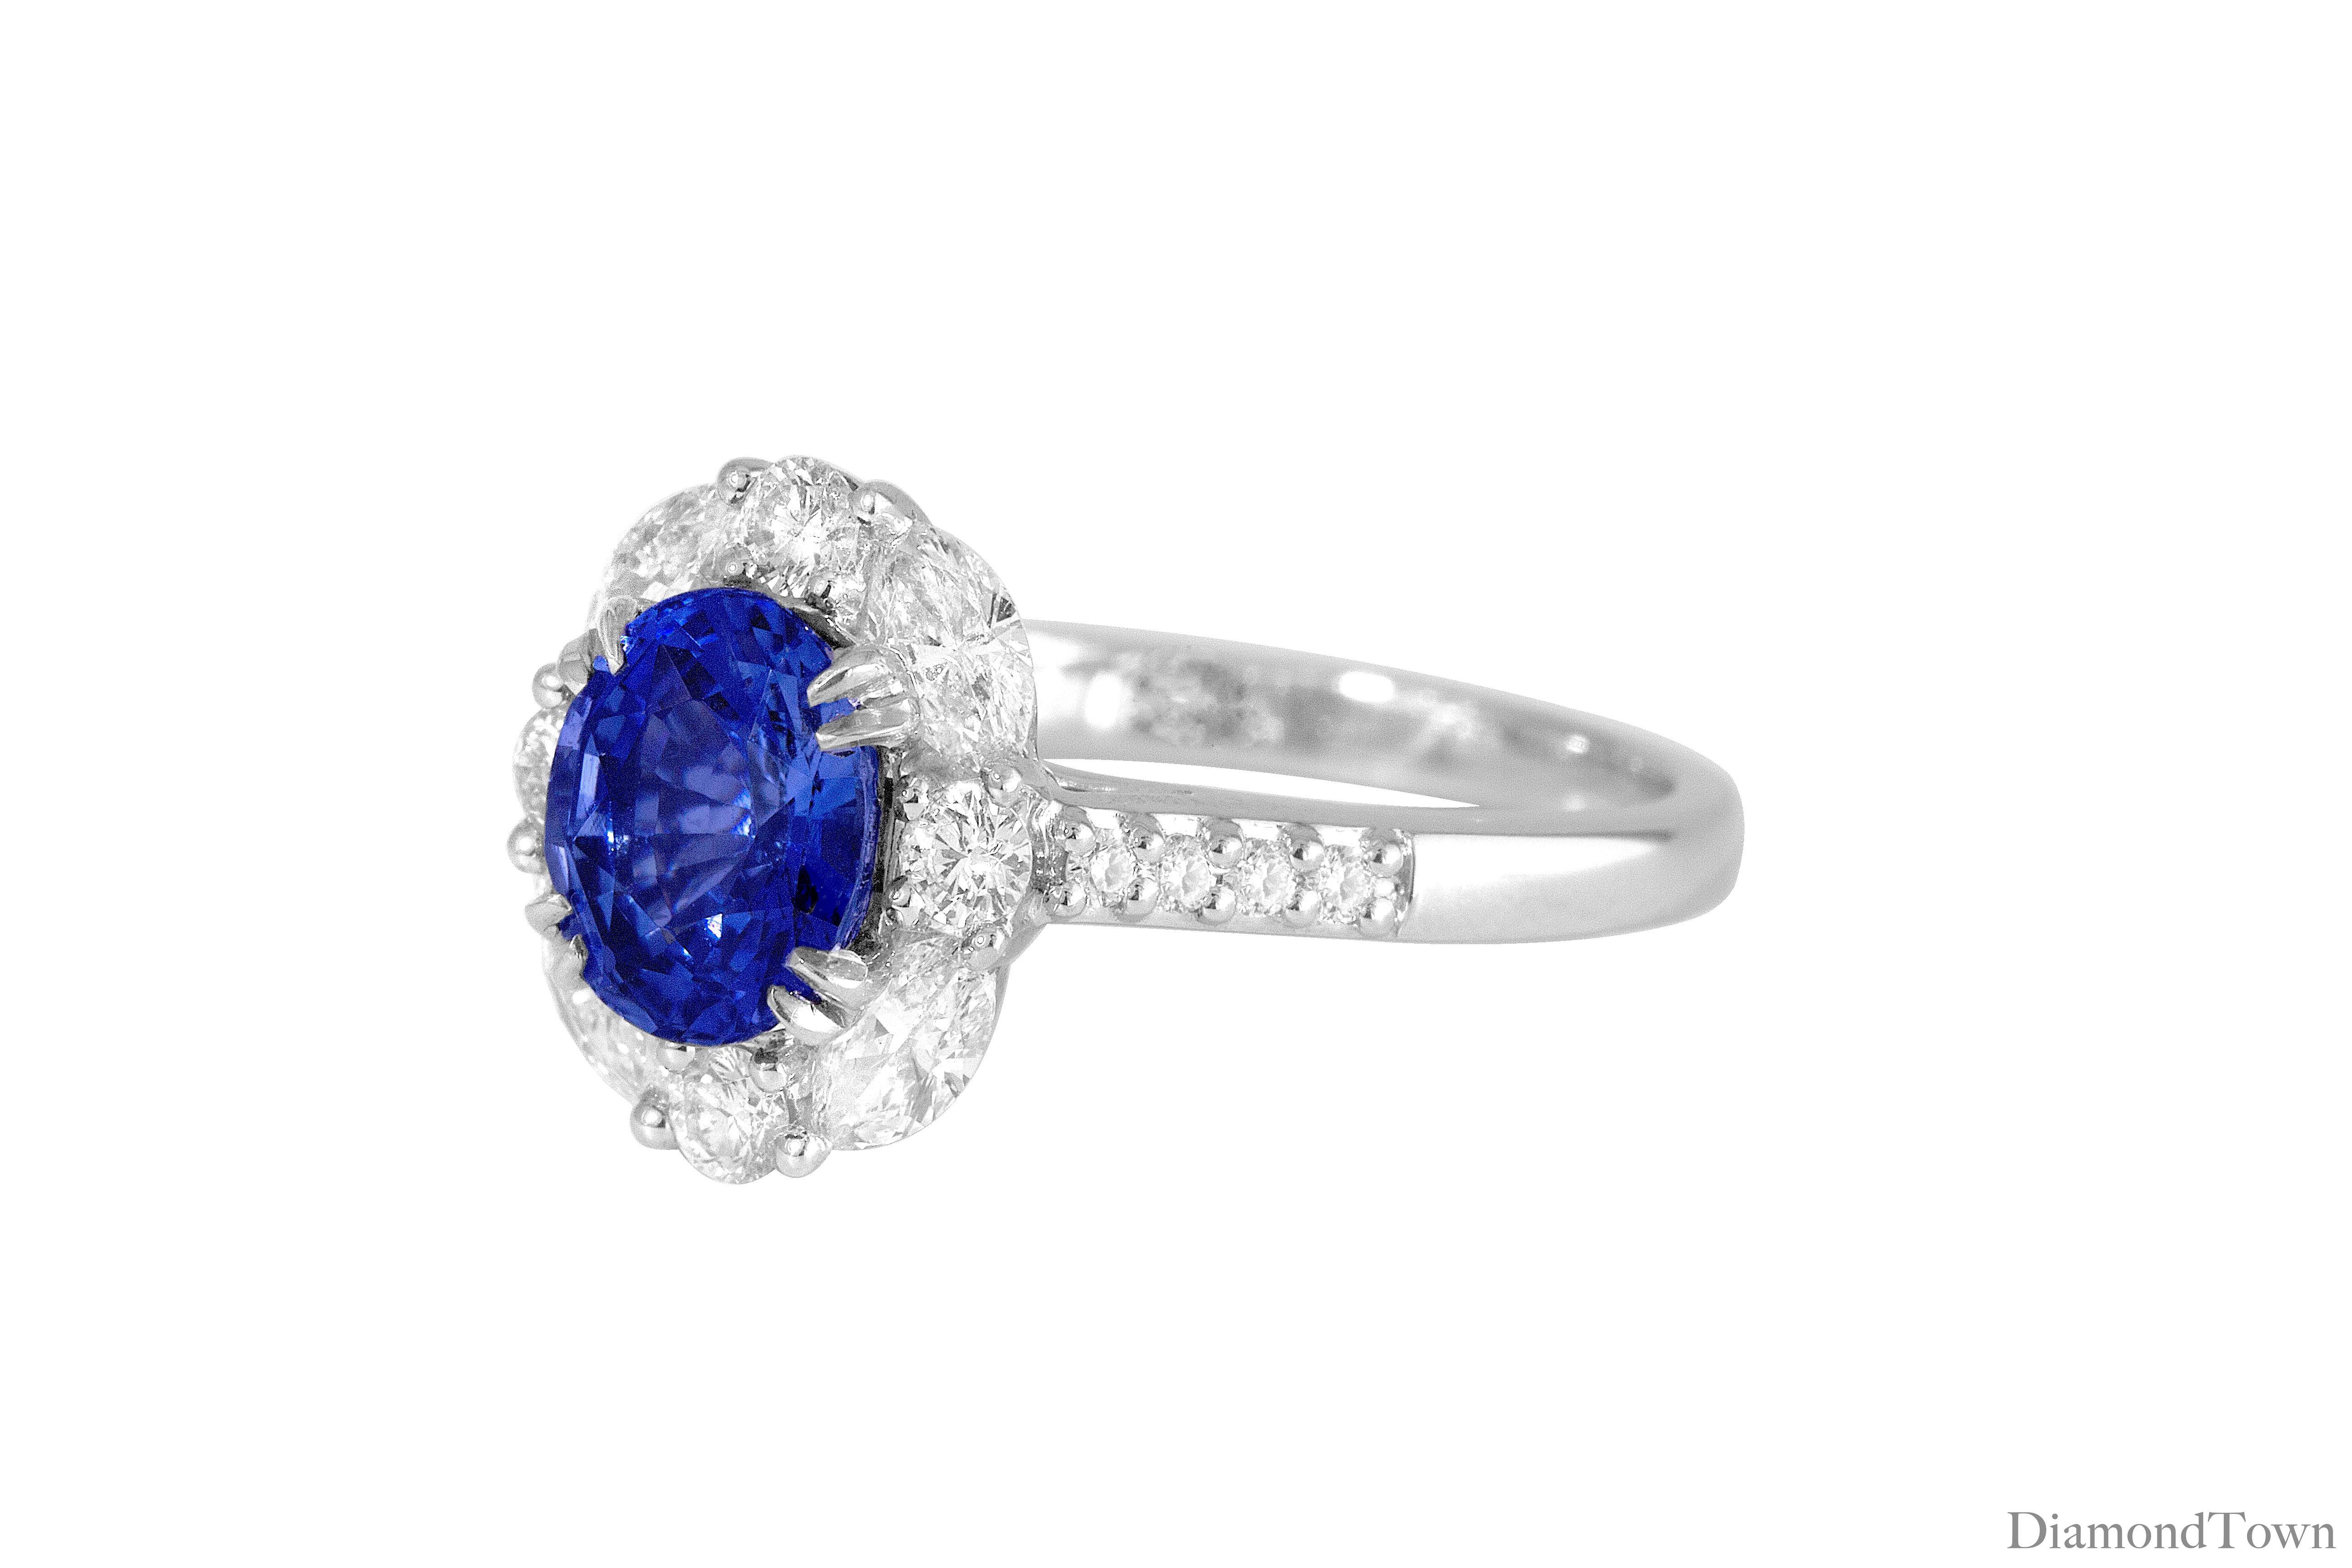 (DiamondTown) This gorgeous ring has a GIA Certified Oval Cut Ceylon Sapphire center measuring 1.83 carats, surrounded by a halo of round and marquise cut white diamonds. Additional diamonds decorate the side shank, including a row of diamonds along